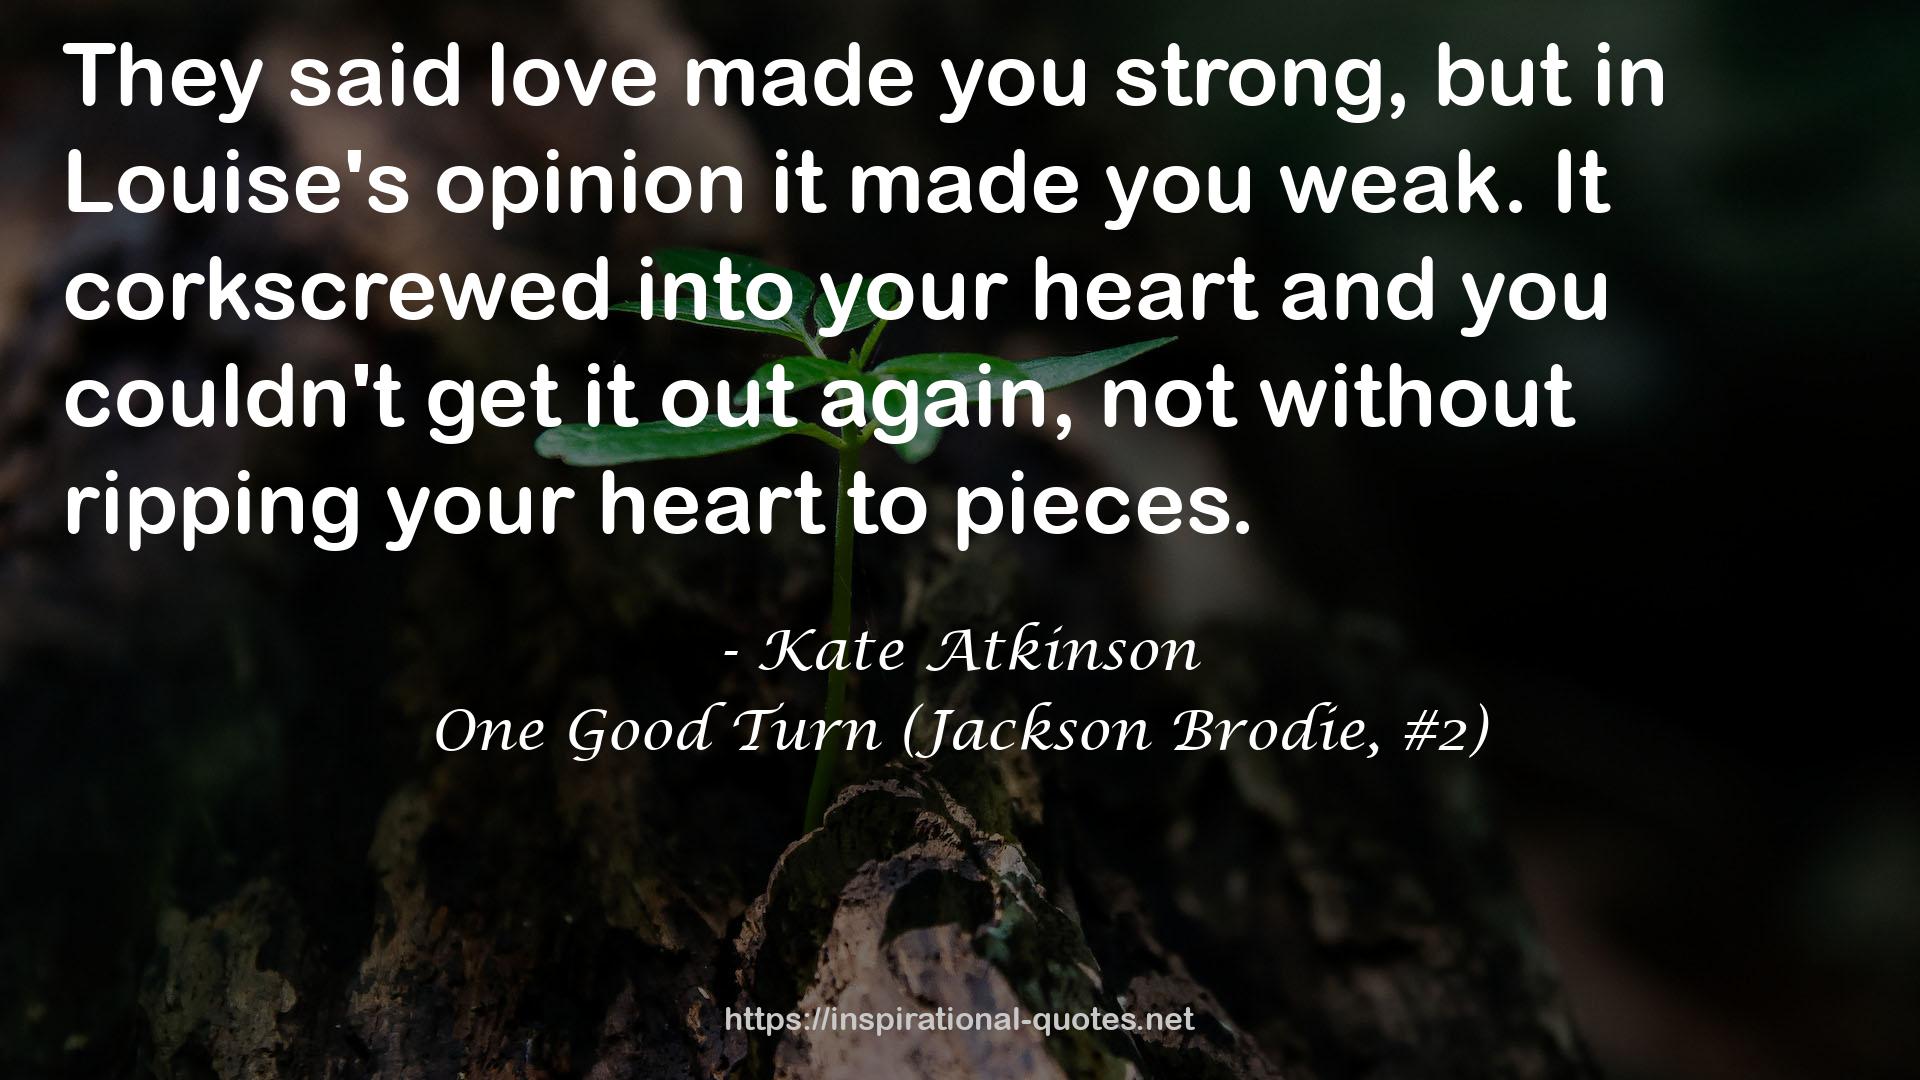 One Good Turn (Jackson Brodie, #2) QUOTES